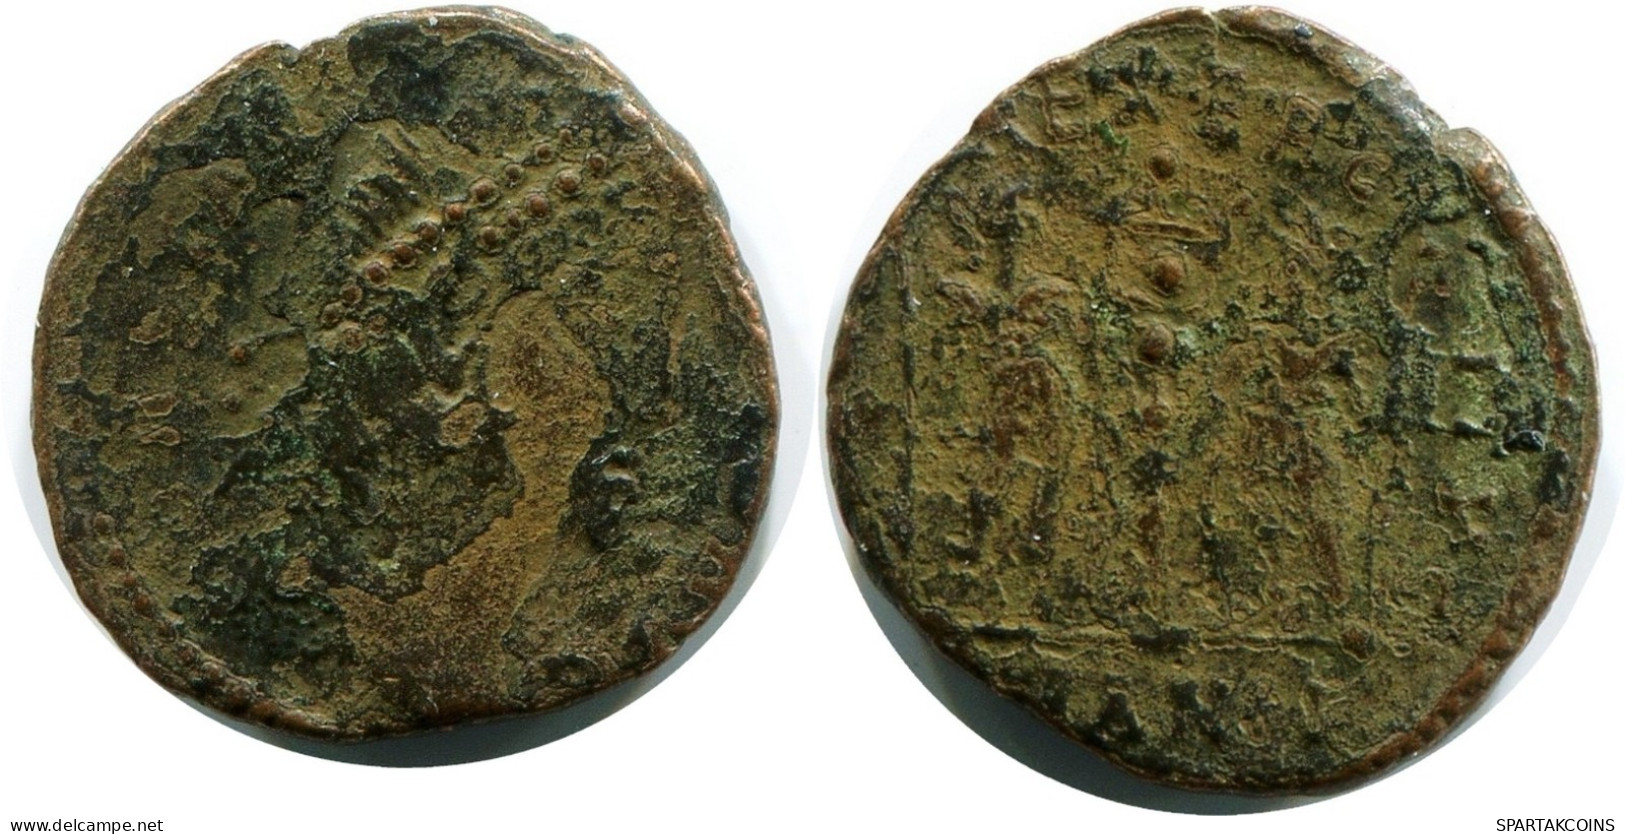 ROMAN Coin MINTED IN ANTIOCH FOUND IN IHNASYAH HOARD EGYPT #ANC11290.14.D.A - El Imperio Christiano (307 / 363)